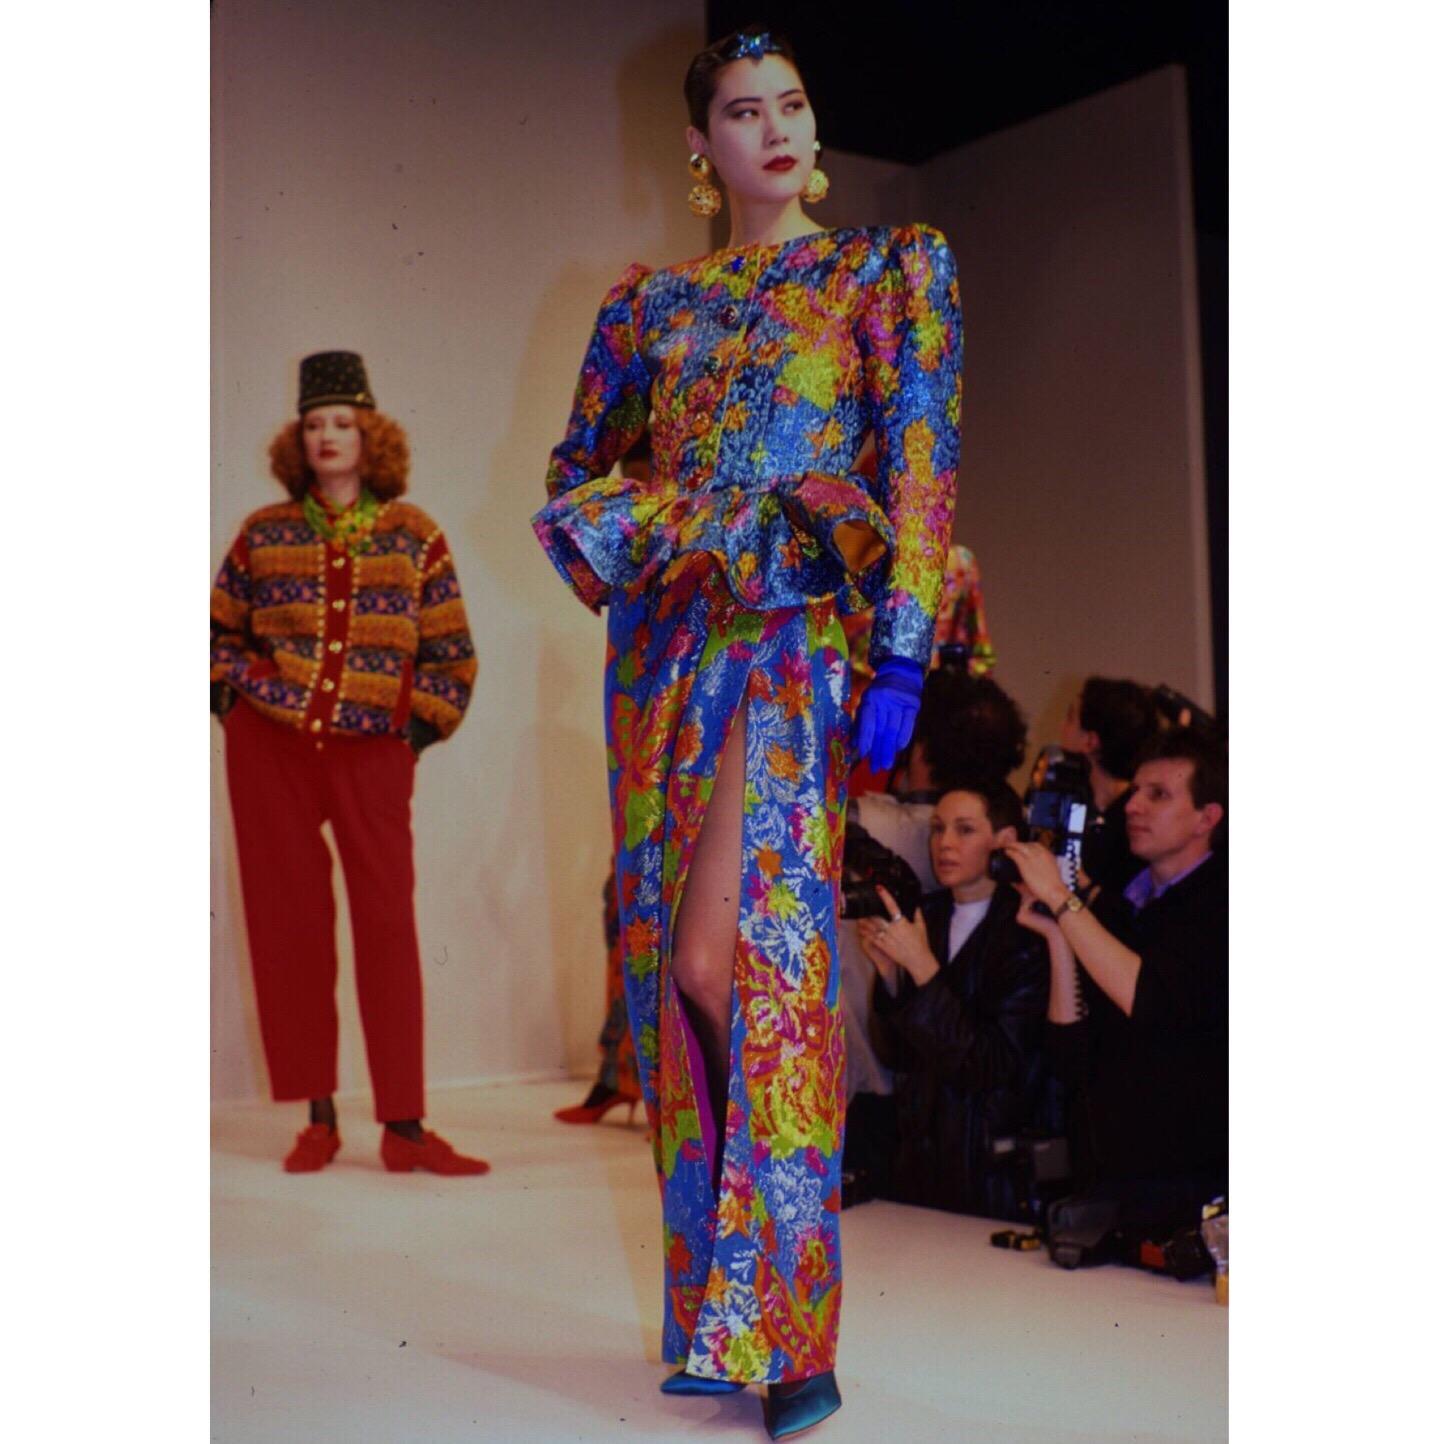 Encompassing his appeal for international inspiration, YSL blended Eurasian styles with his usual bright color combinations during the Fall/Winter 1989 collection. Mr. Saint Laurent's  ability to make globally inspired designs by melding several